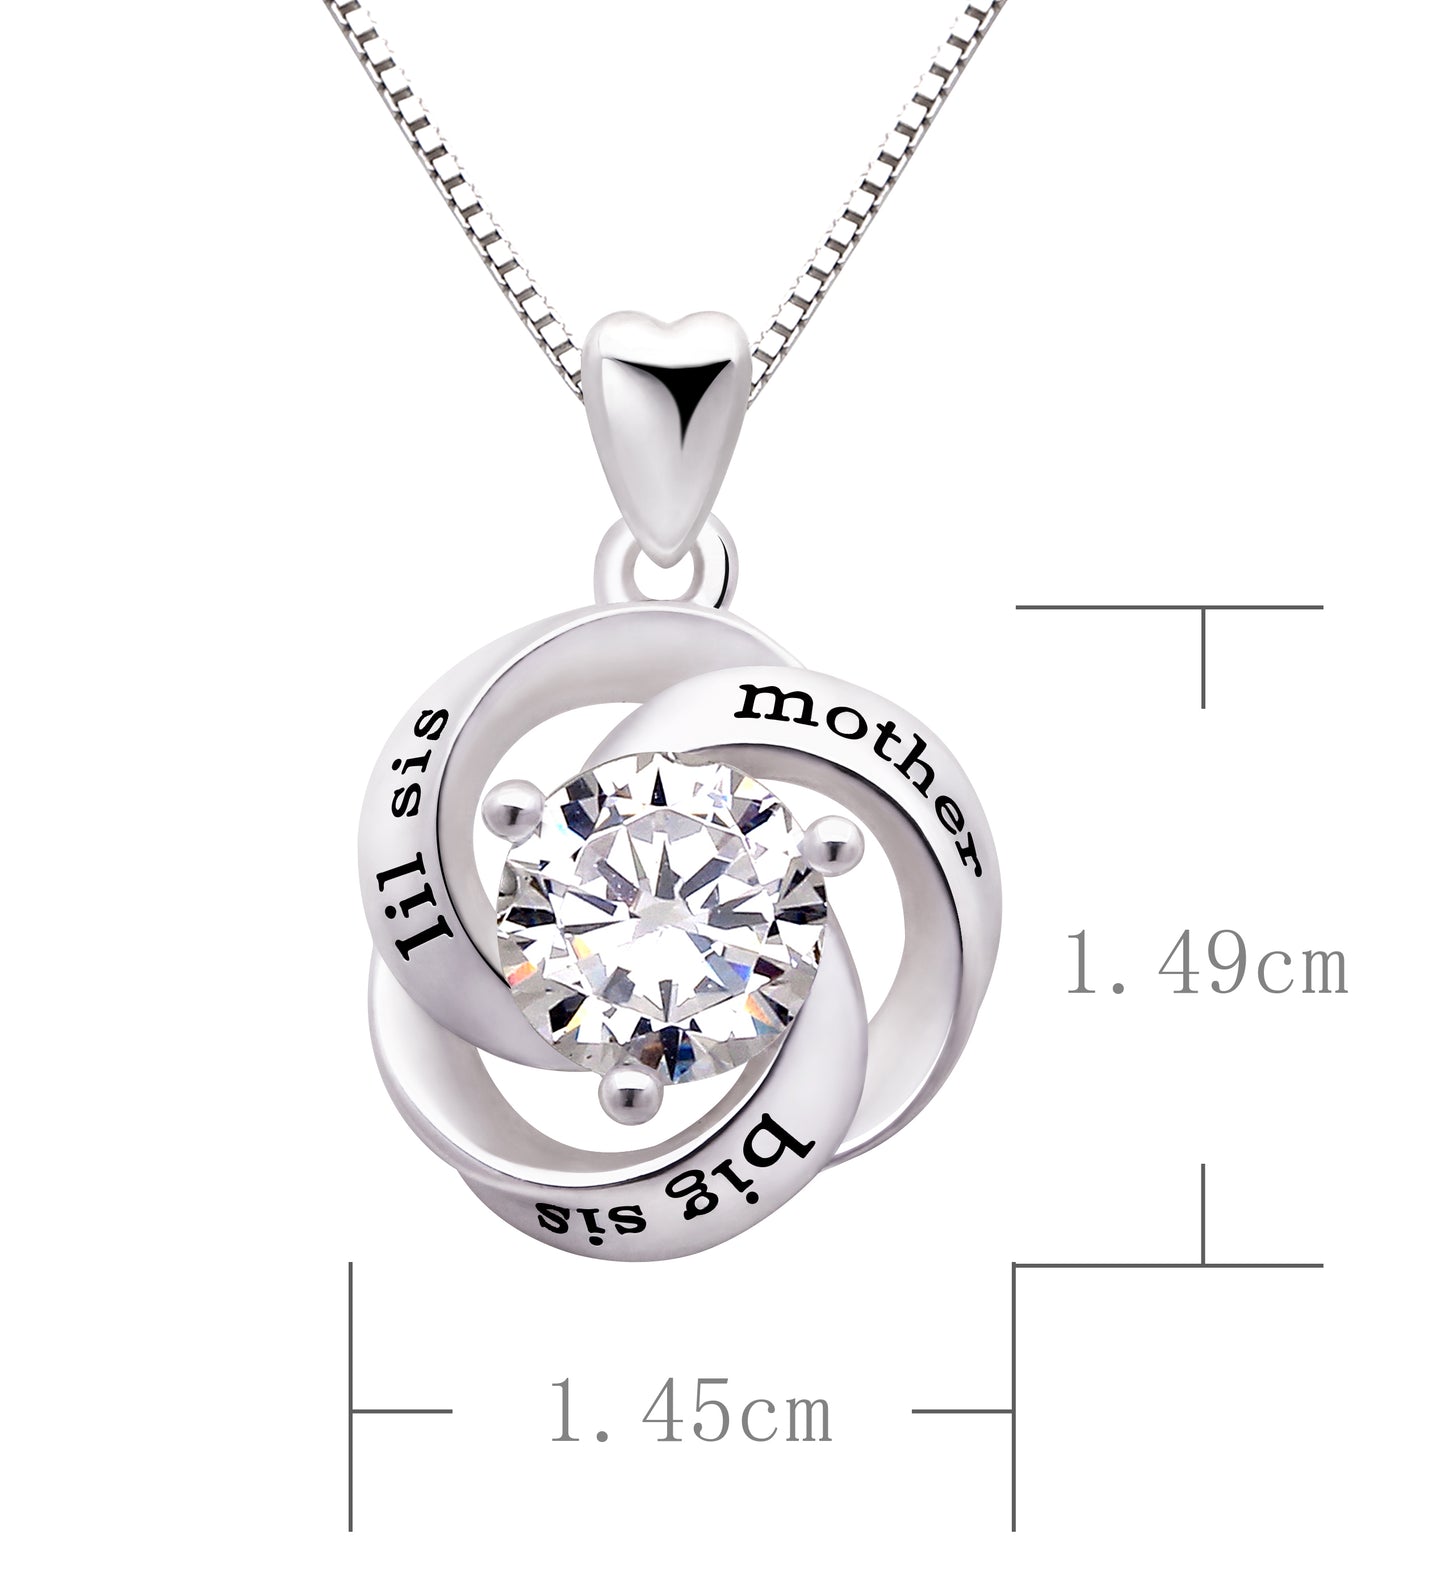 ALOV Jewelry Sterling Silver mother, big sis, lil sis Love Cubic Zirconia Pendant Necklace